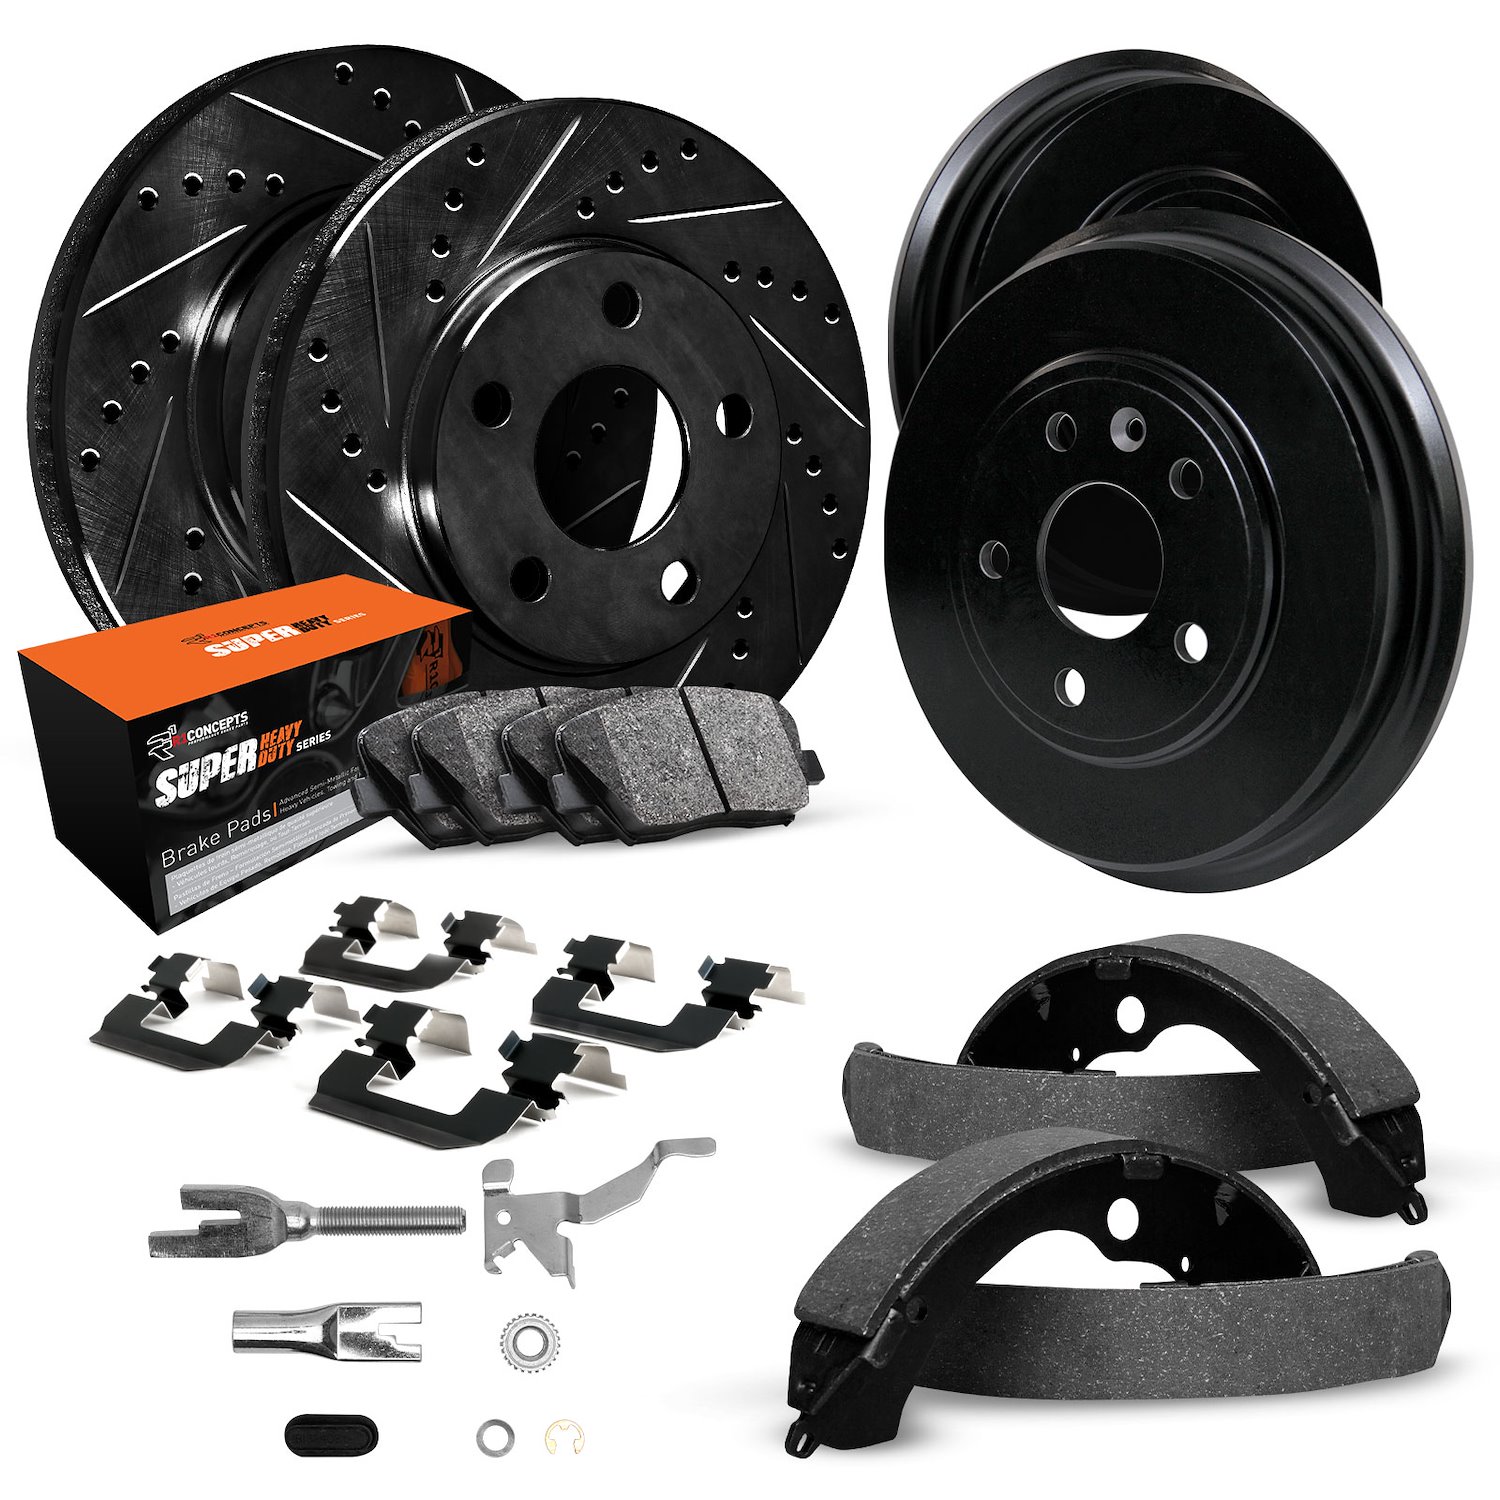 E-Line Drilled/Slotted Black Rotor & Drum Set w/Super-Duty Pads, Shoes, Hardware/Adjusters, 1992-1993 Ford/Lincoln/Mercury/Mazda